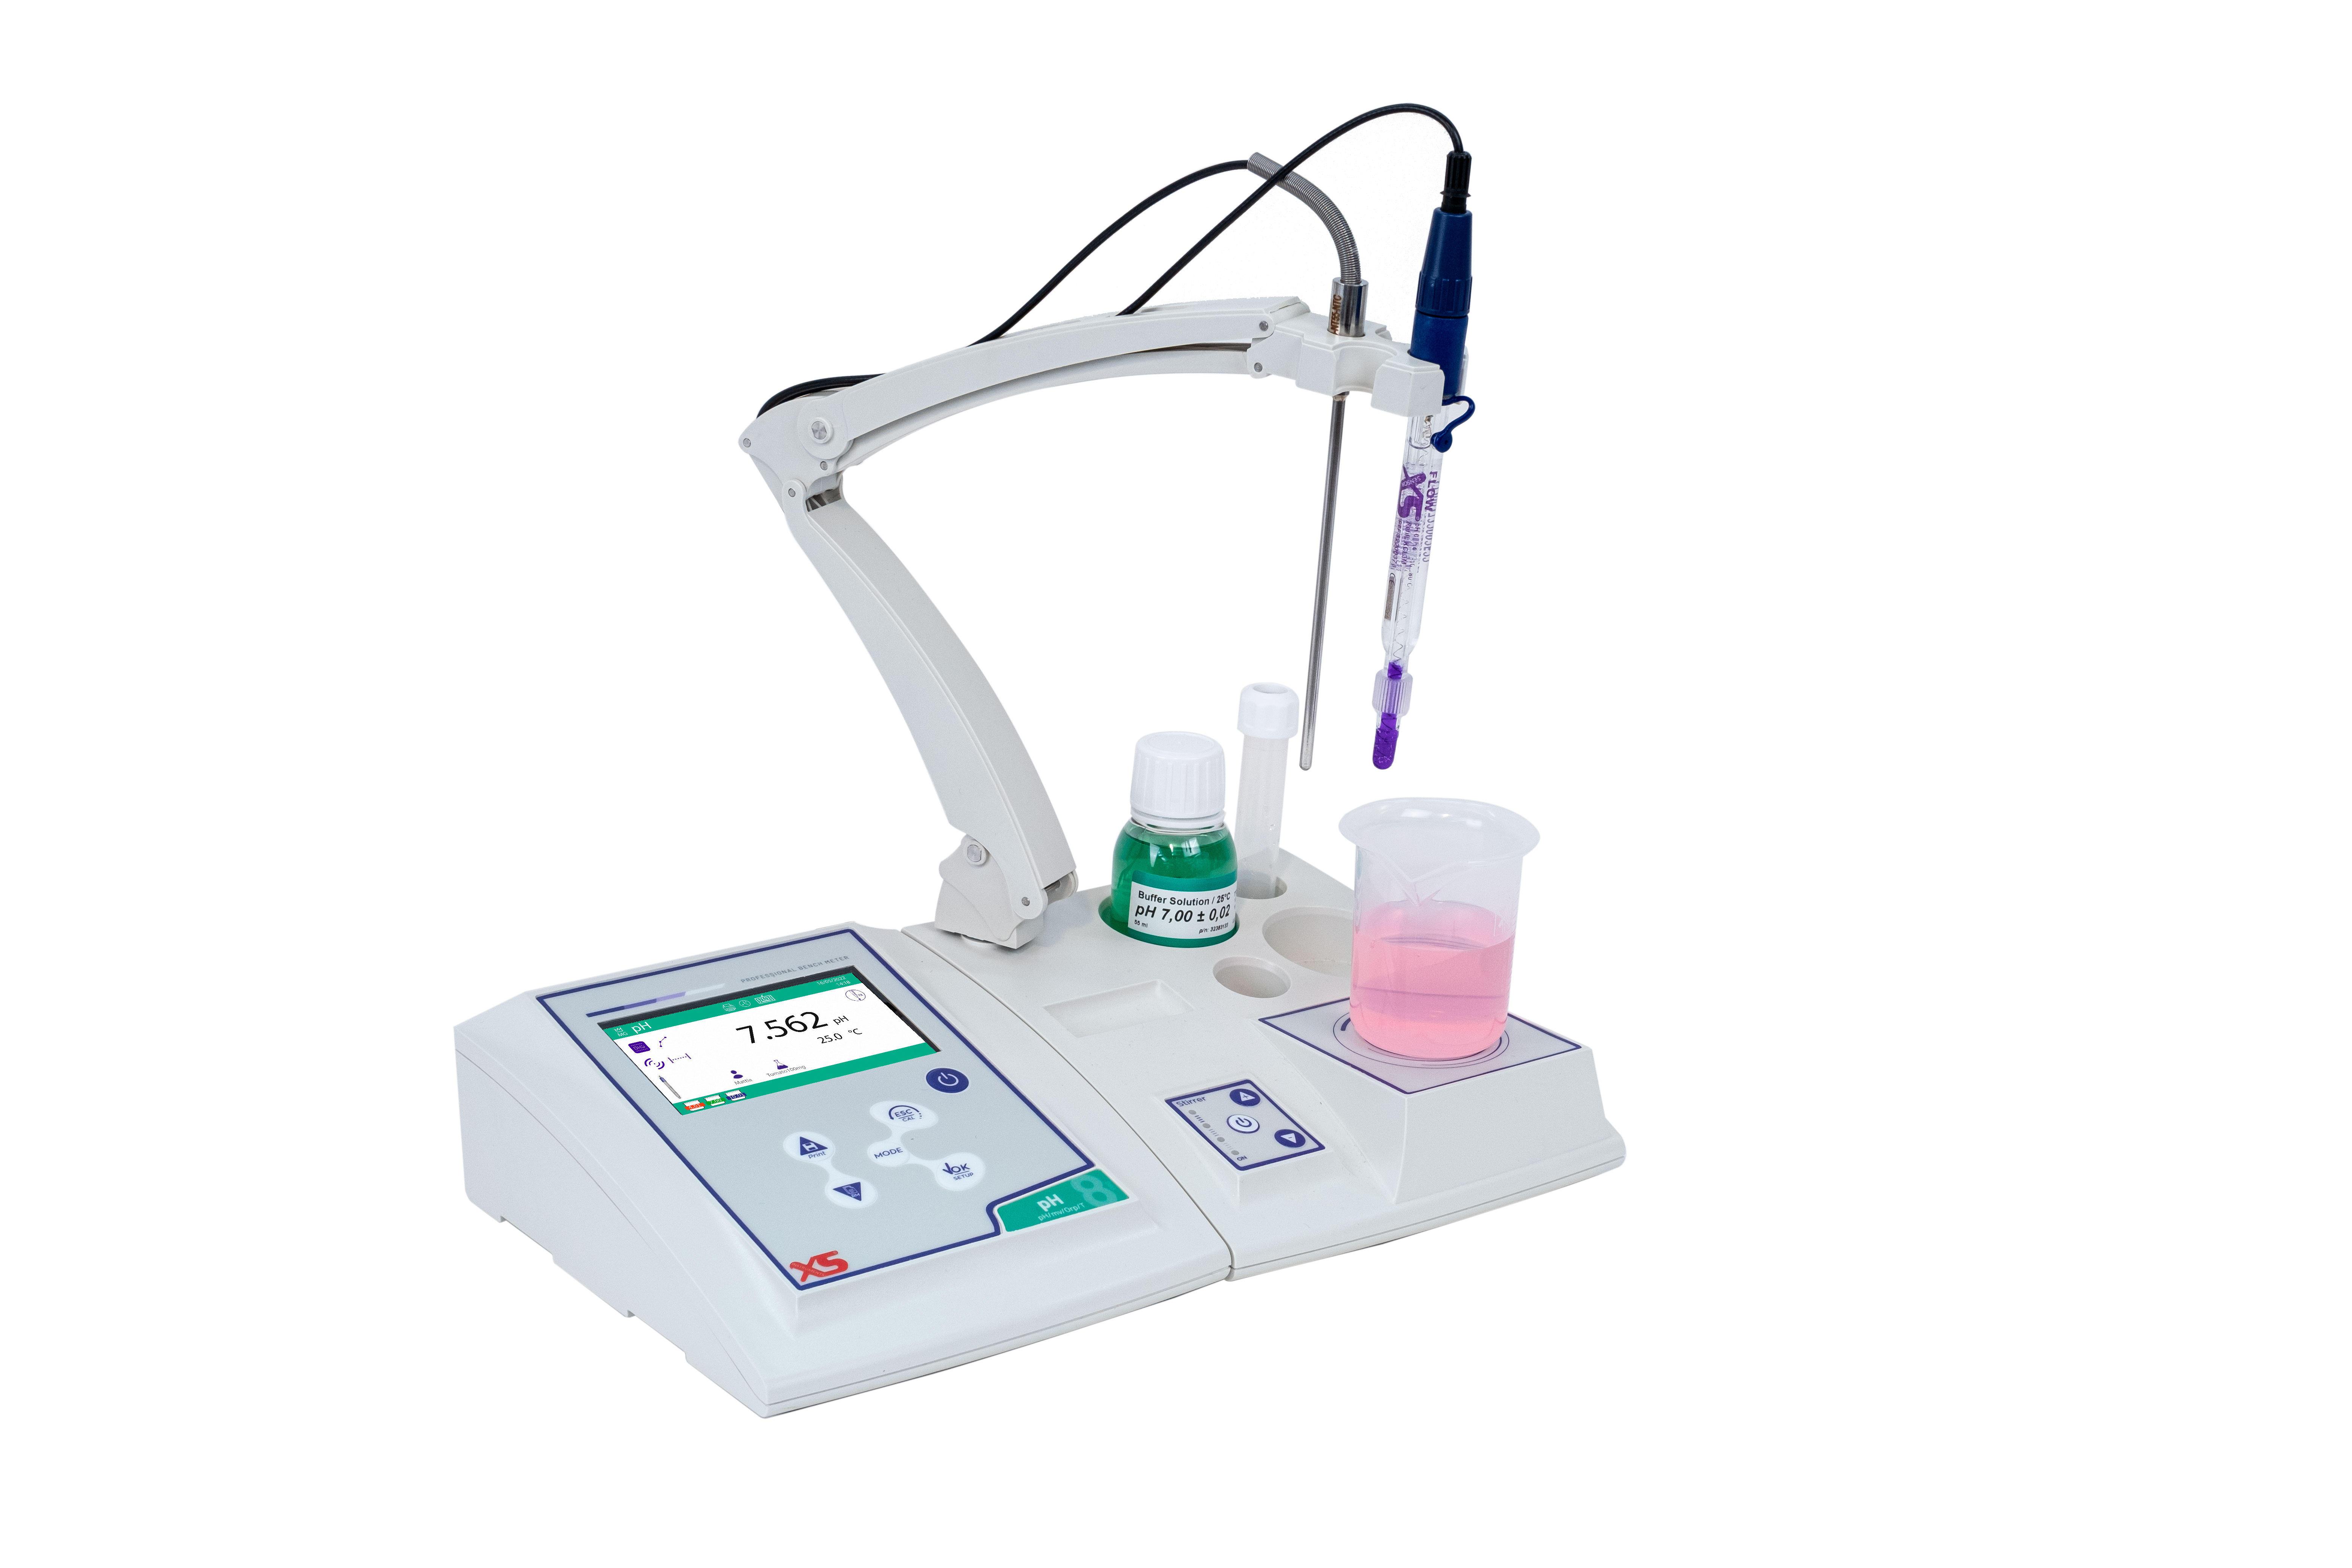 Benchtop pHmeters PH 8 PRO. XS. Magnetic stirrer with arm. Electrode: without electrode. Cable AS7/BNC.  Tempreature sensor. Buffer solutions pH 7 and pH 4. Datalogger and Datalink software. Measurement range: pH -2.00 a 16.00. Temp. -10 a 120.0 ºC. mV ± 2000 mV.